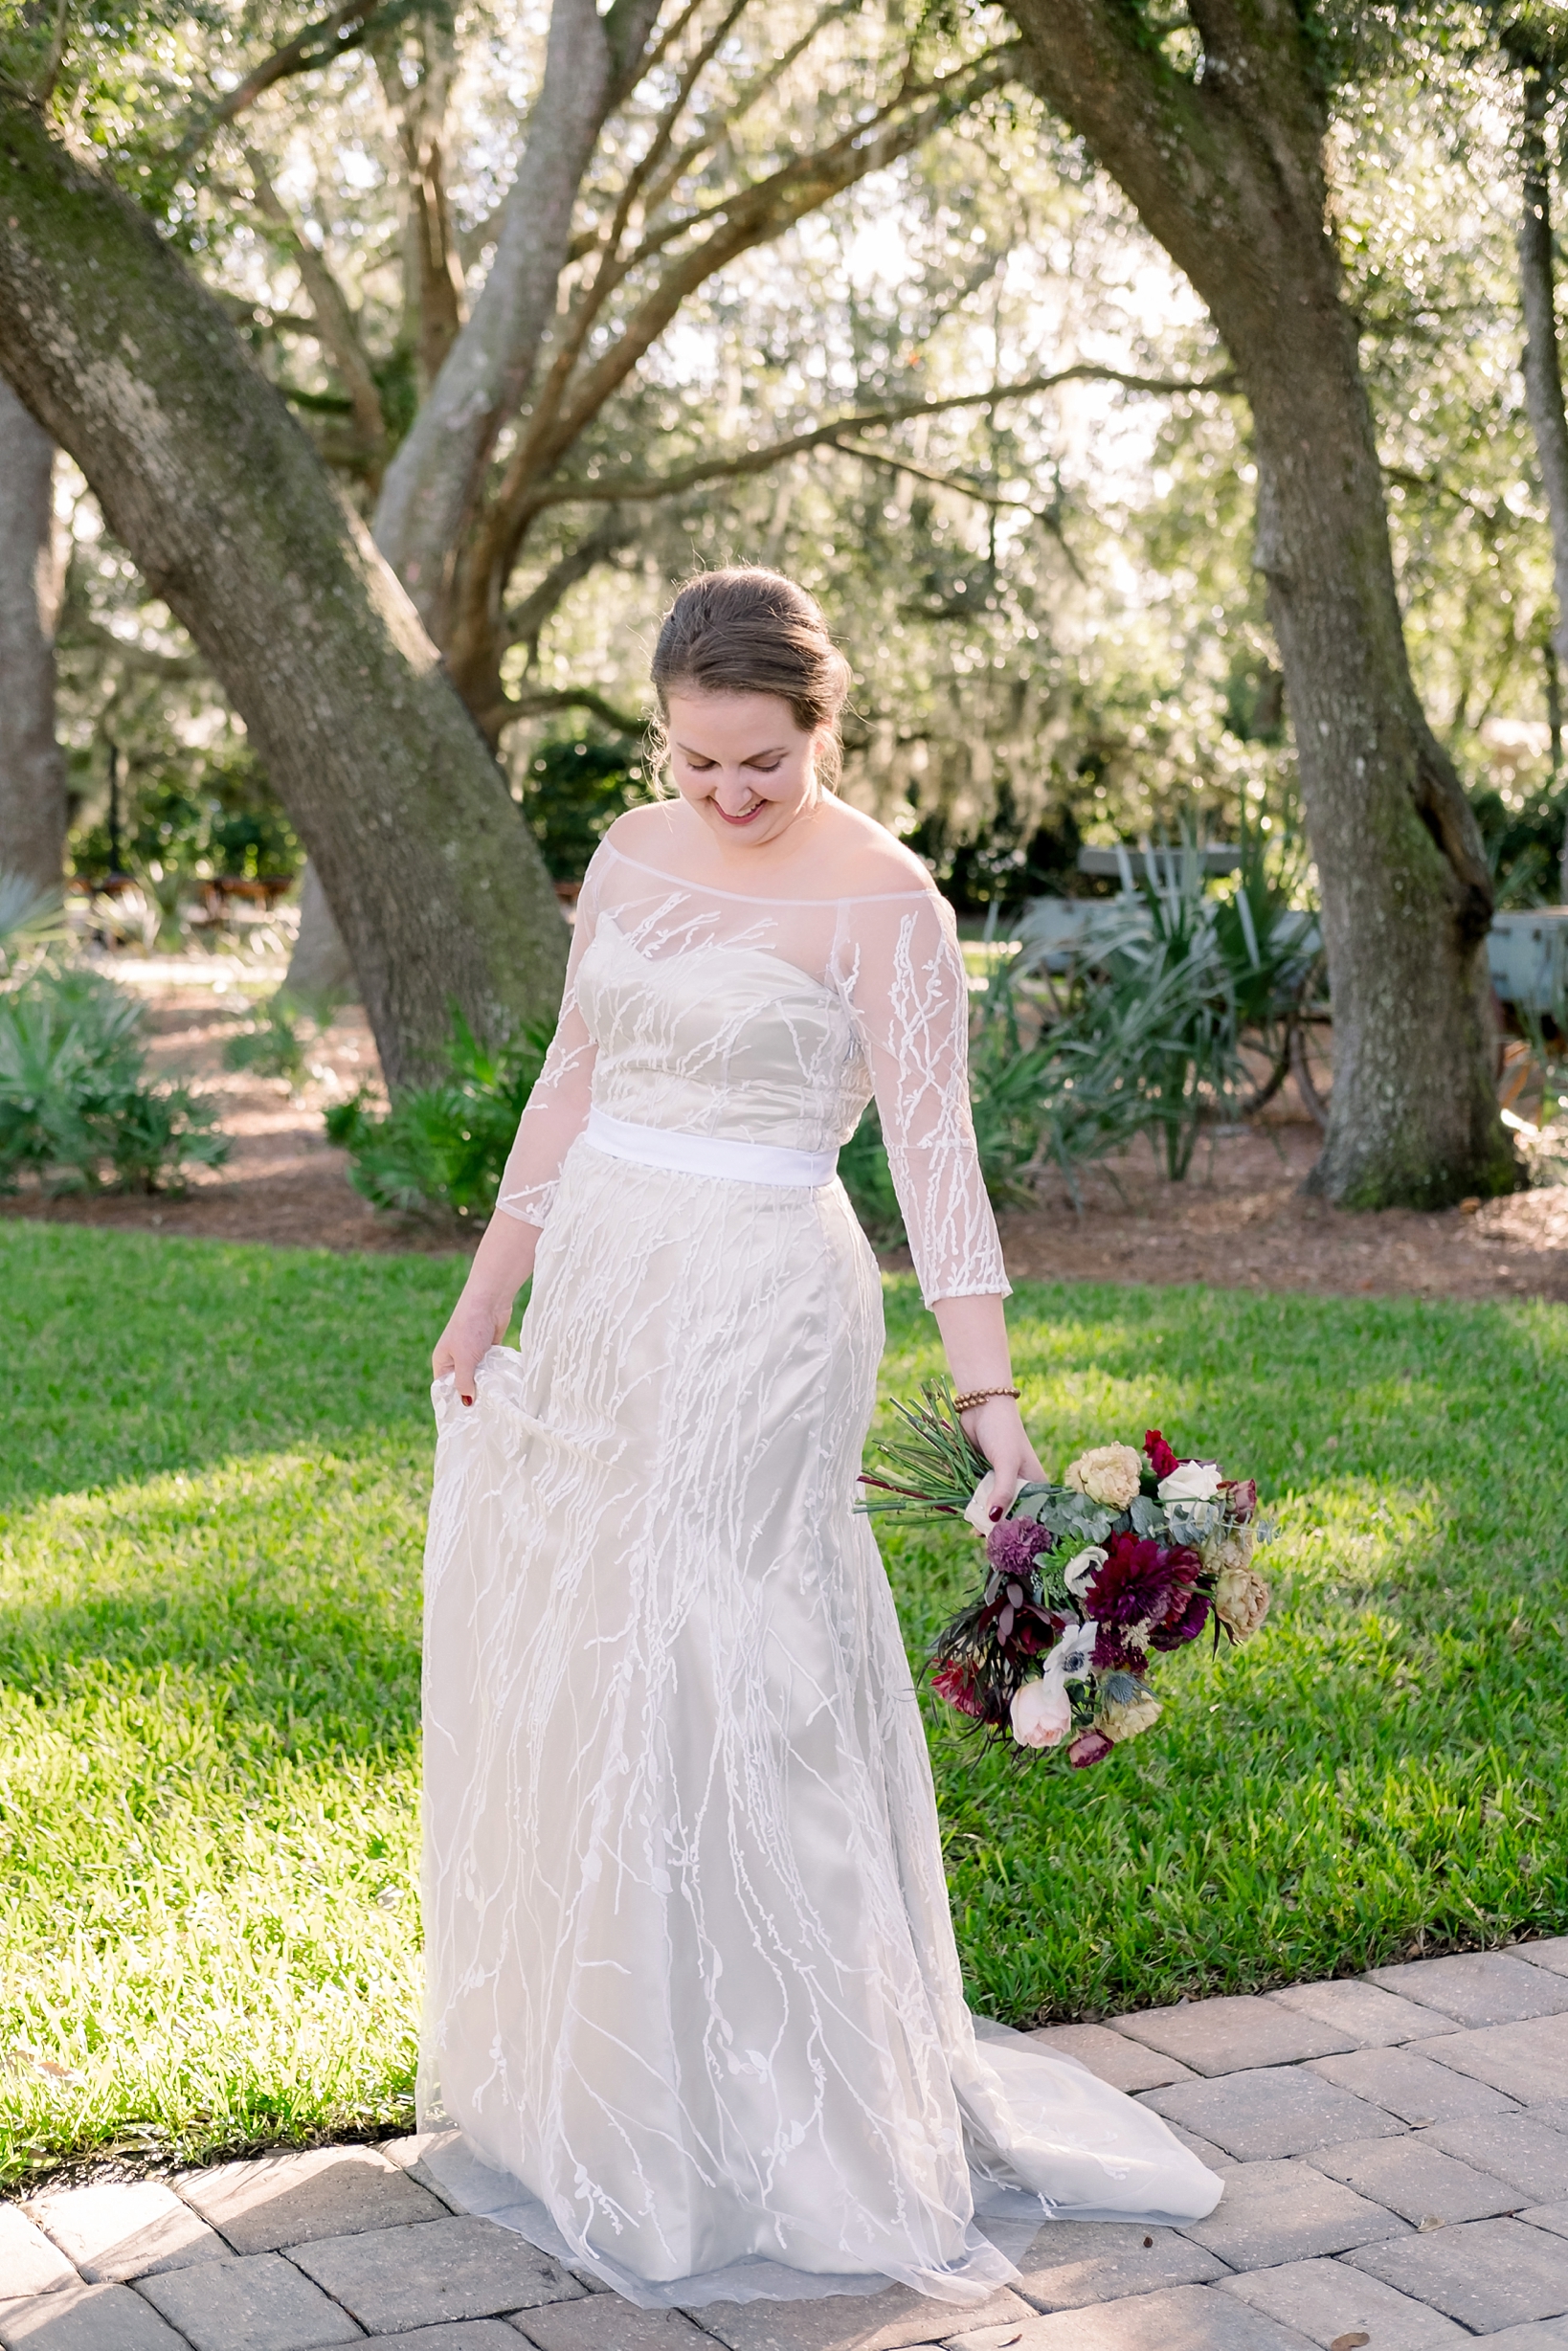 The Bride holding her dress and her bouquet as she walks a brick path by Sarah & Ben Photography